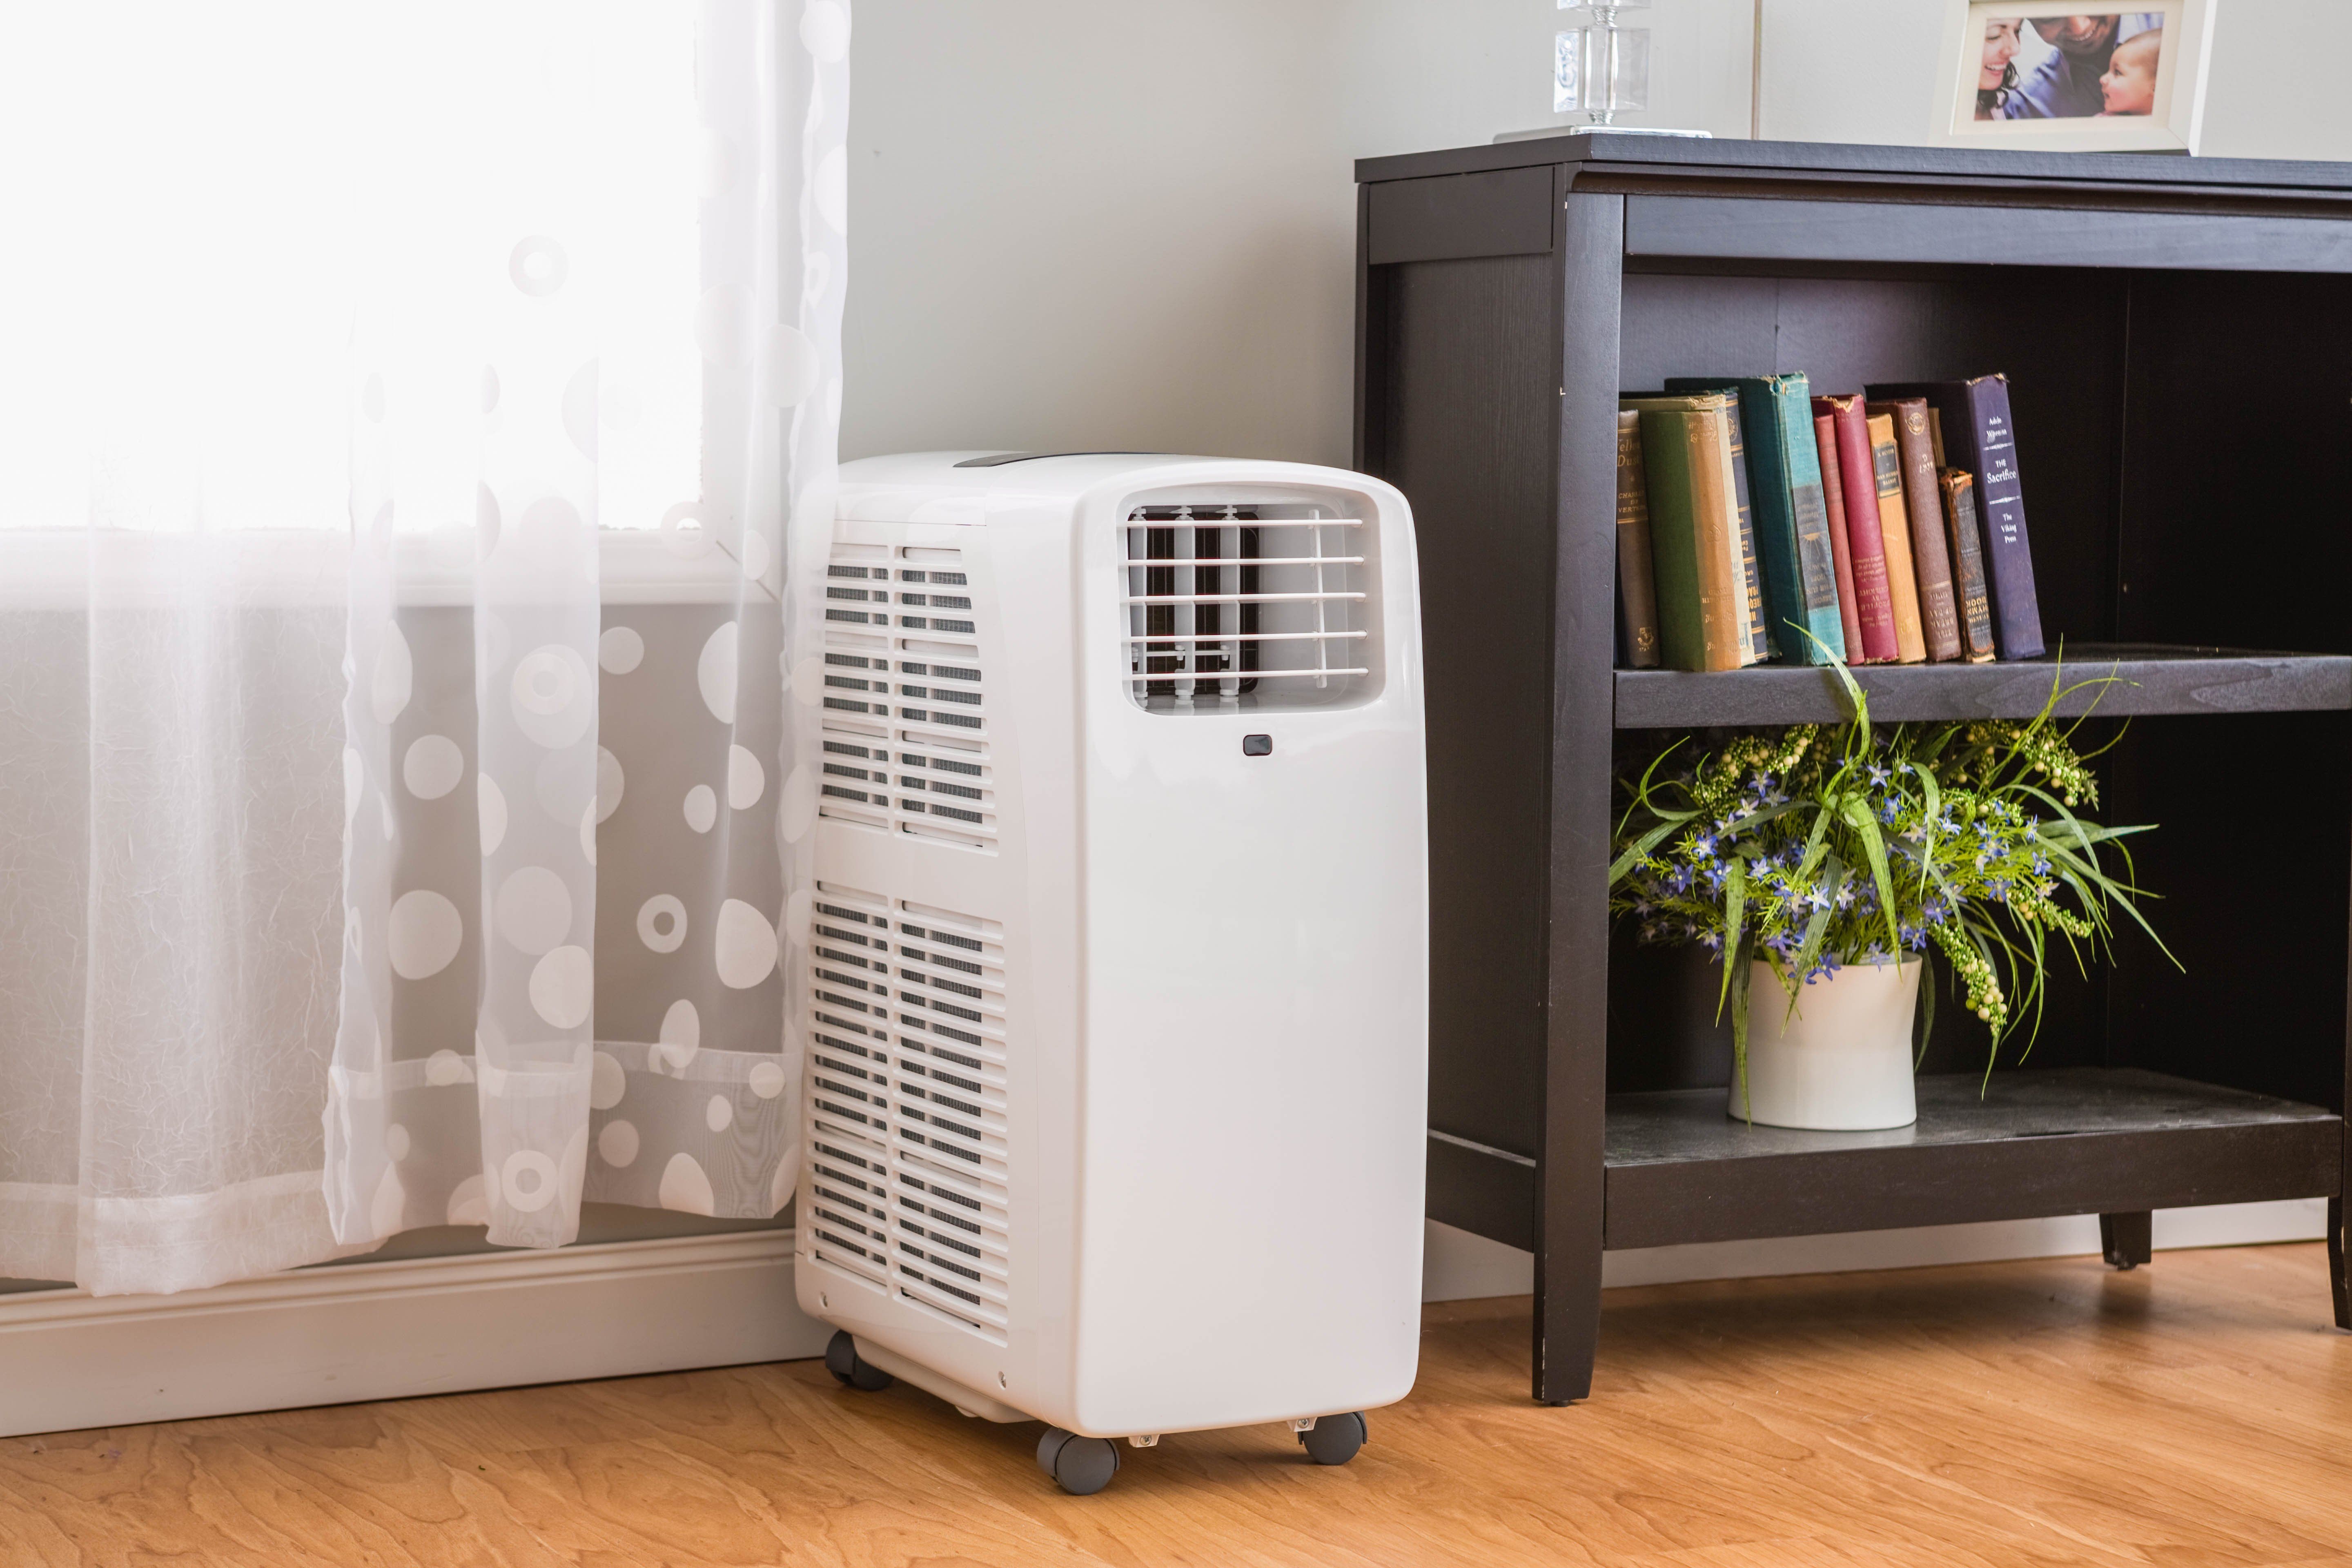 The Best Dehumidifier Buyers Guide 2019 Product Reviews by ReviewThis